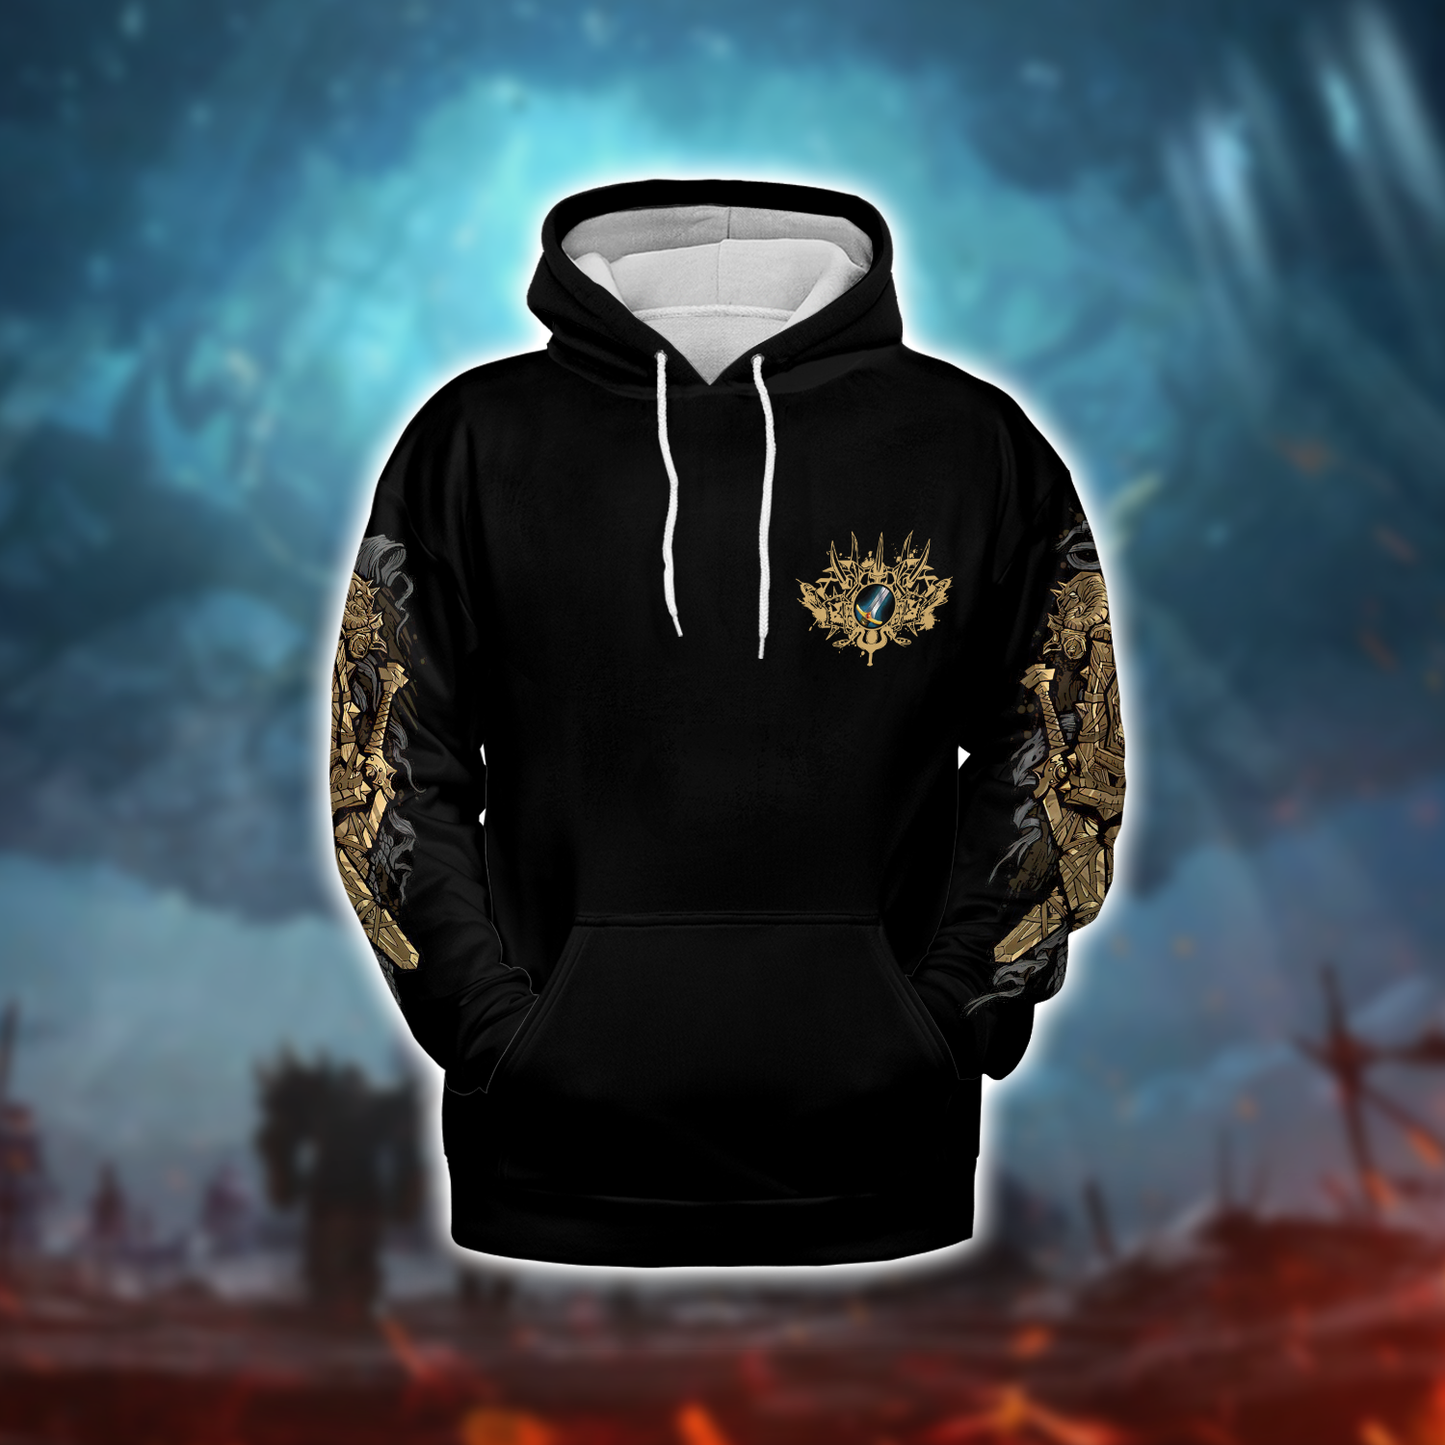 Arms Warrior WoW Class Guide V1 AOP Hoodie